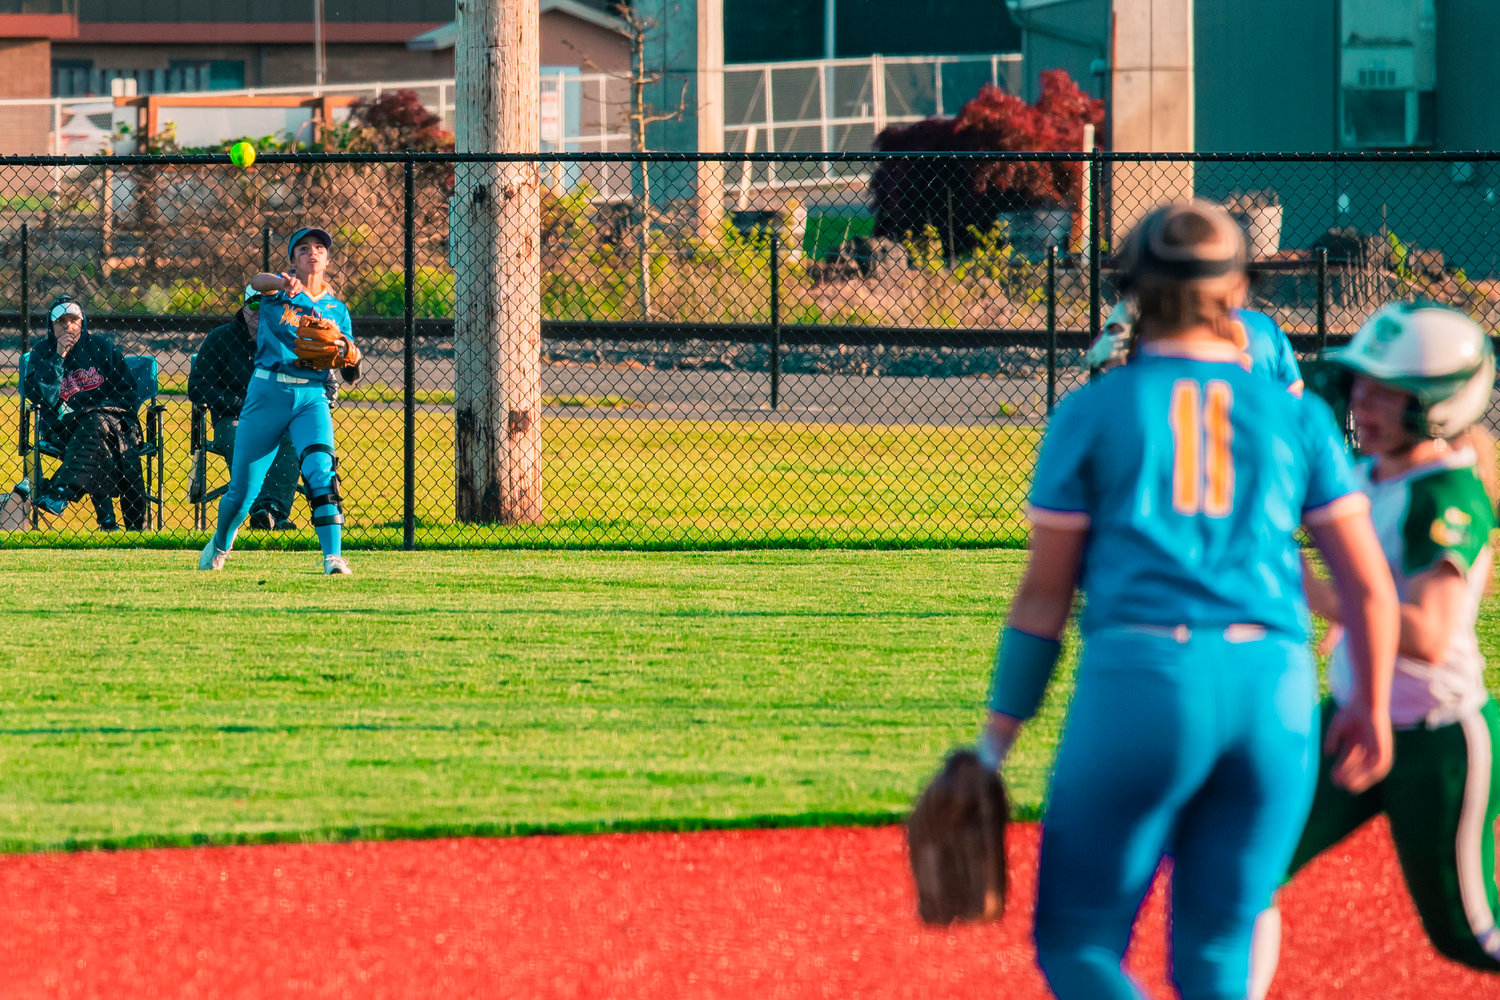 A ball is thrown in from the outfield as players make their way around the bases during a game Tuesday afternoon in Chehalis.